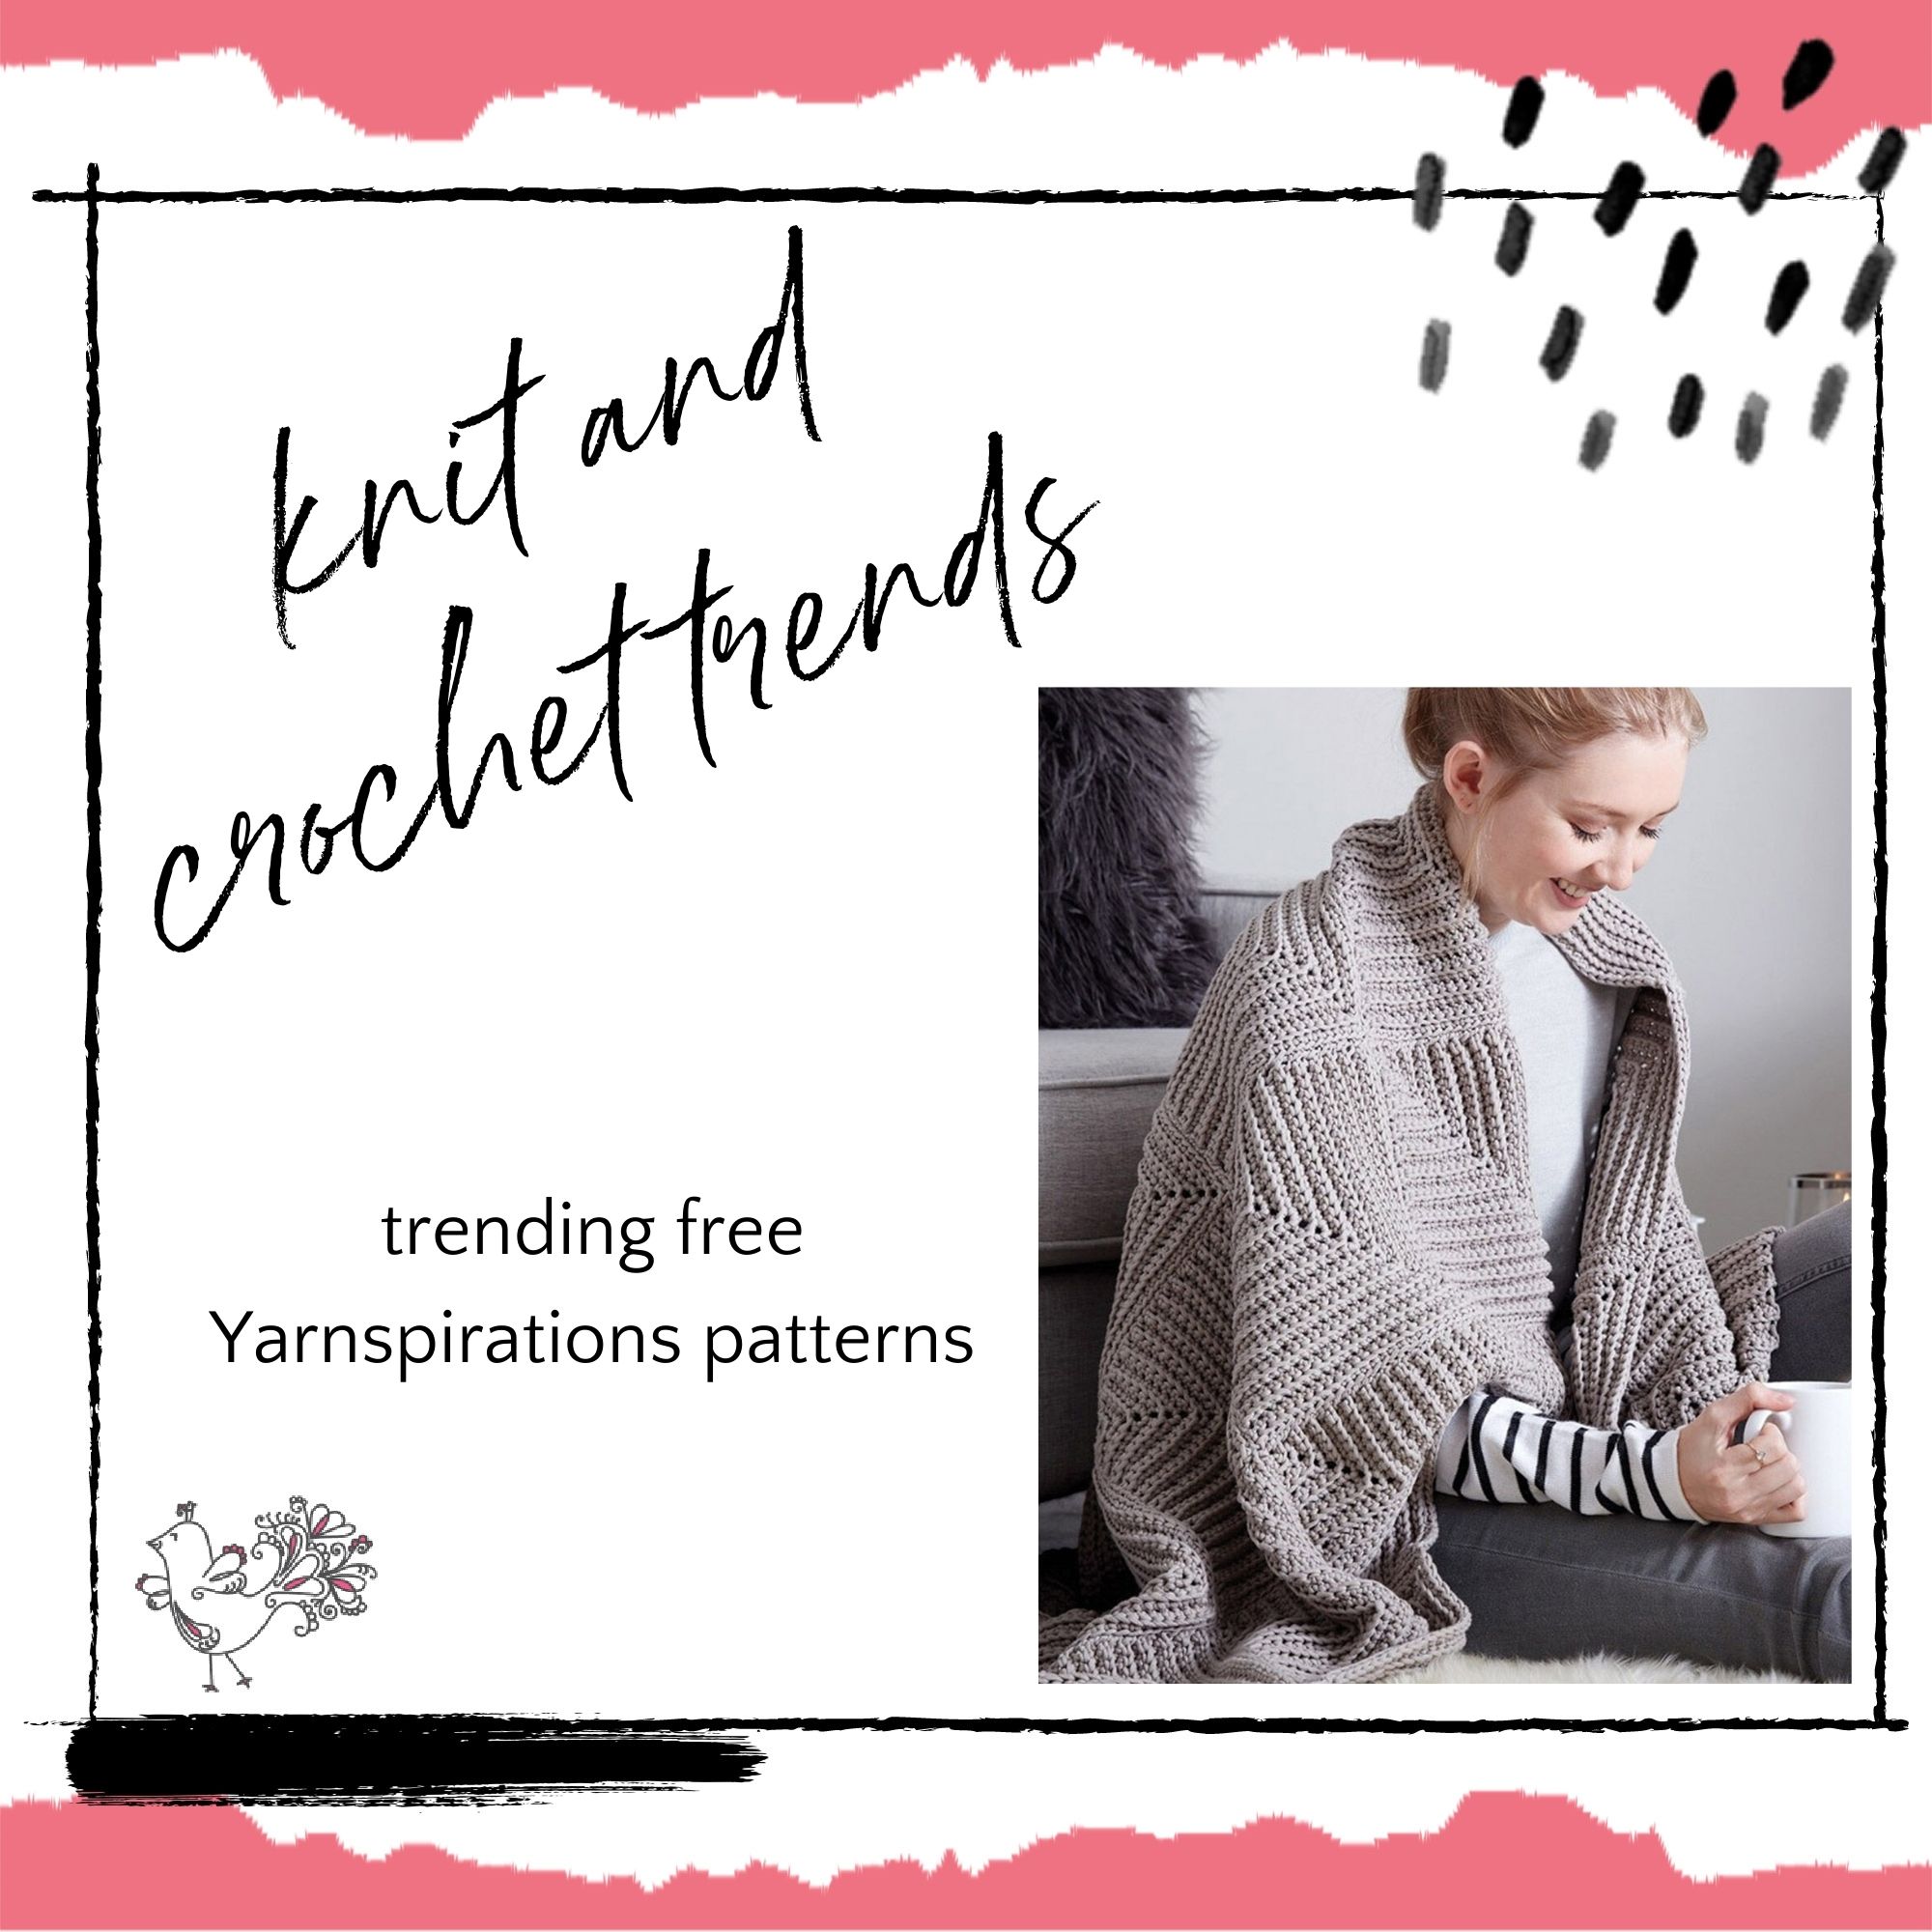 knit and crochet trends